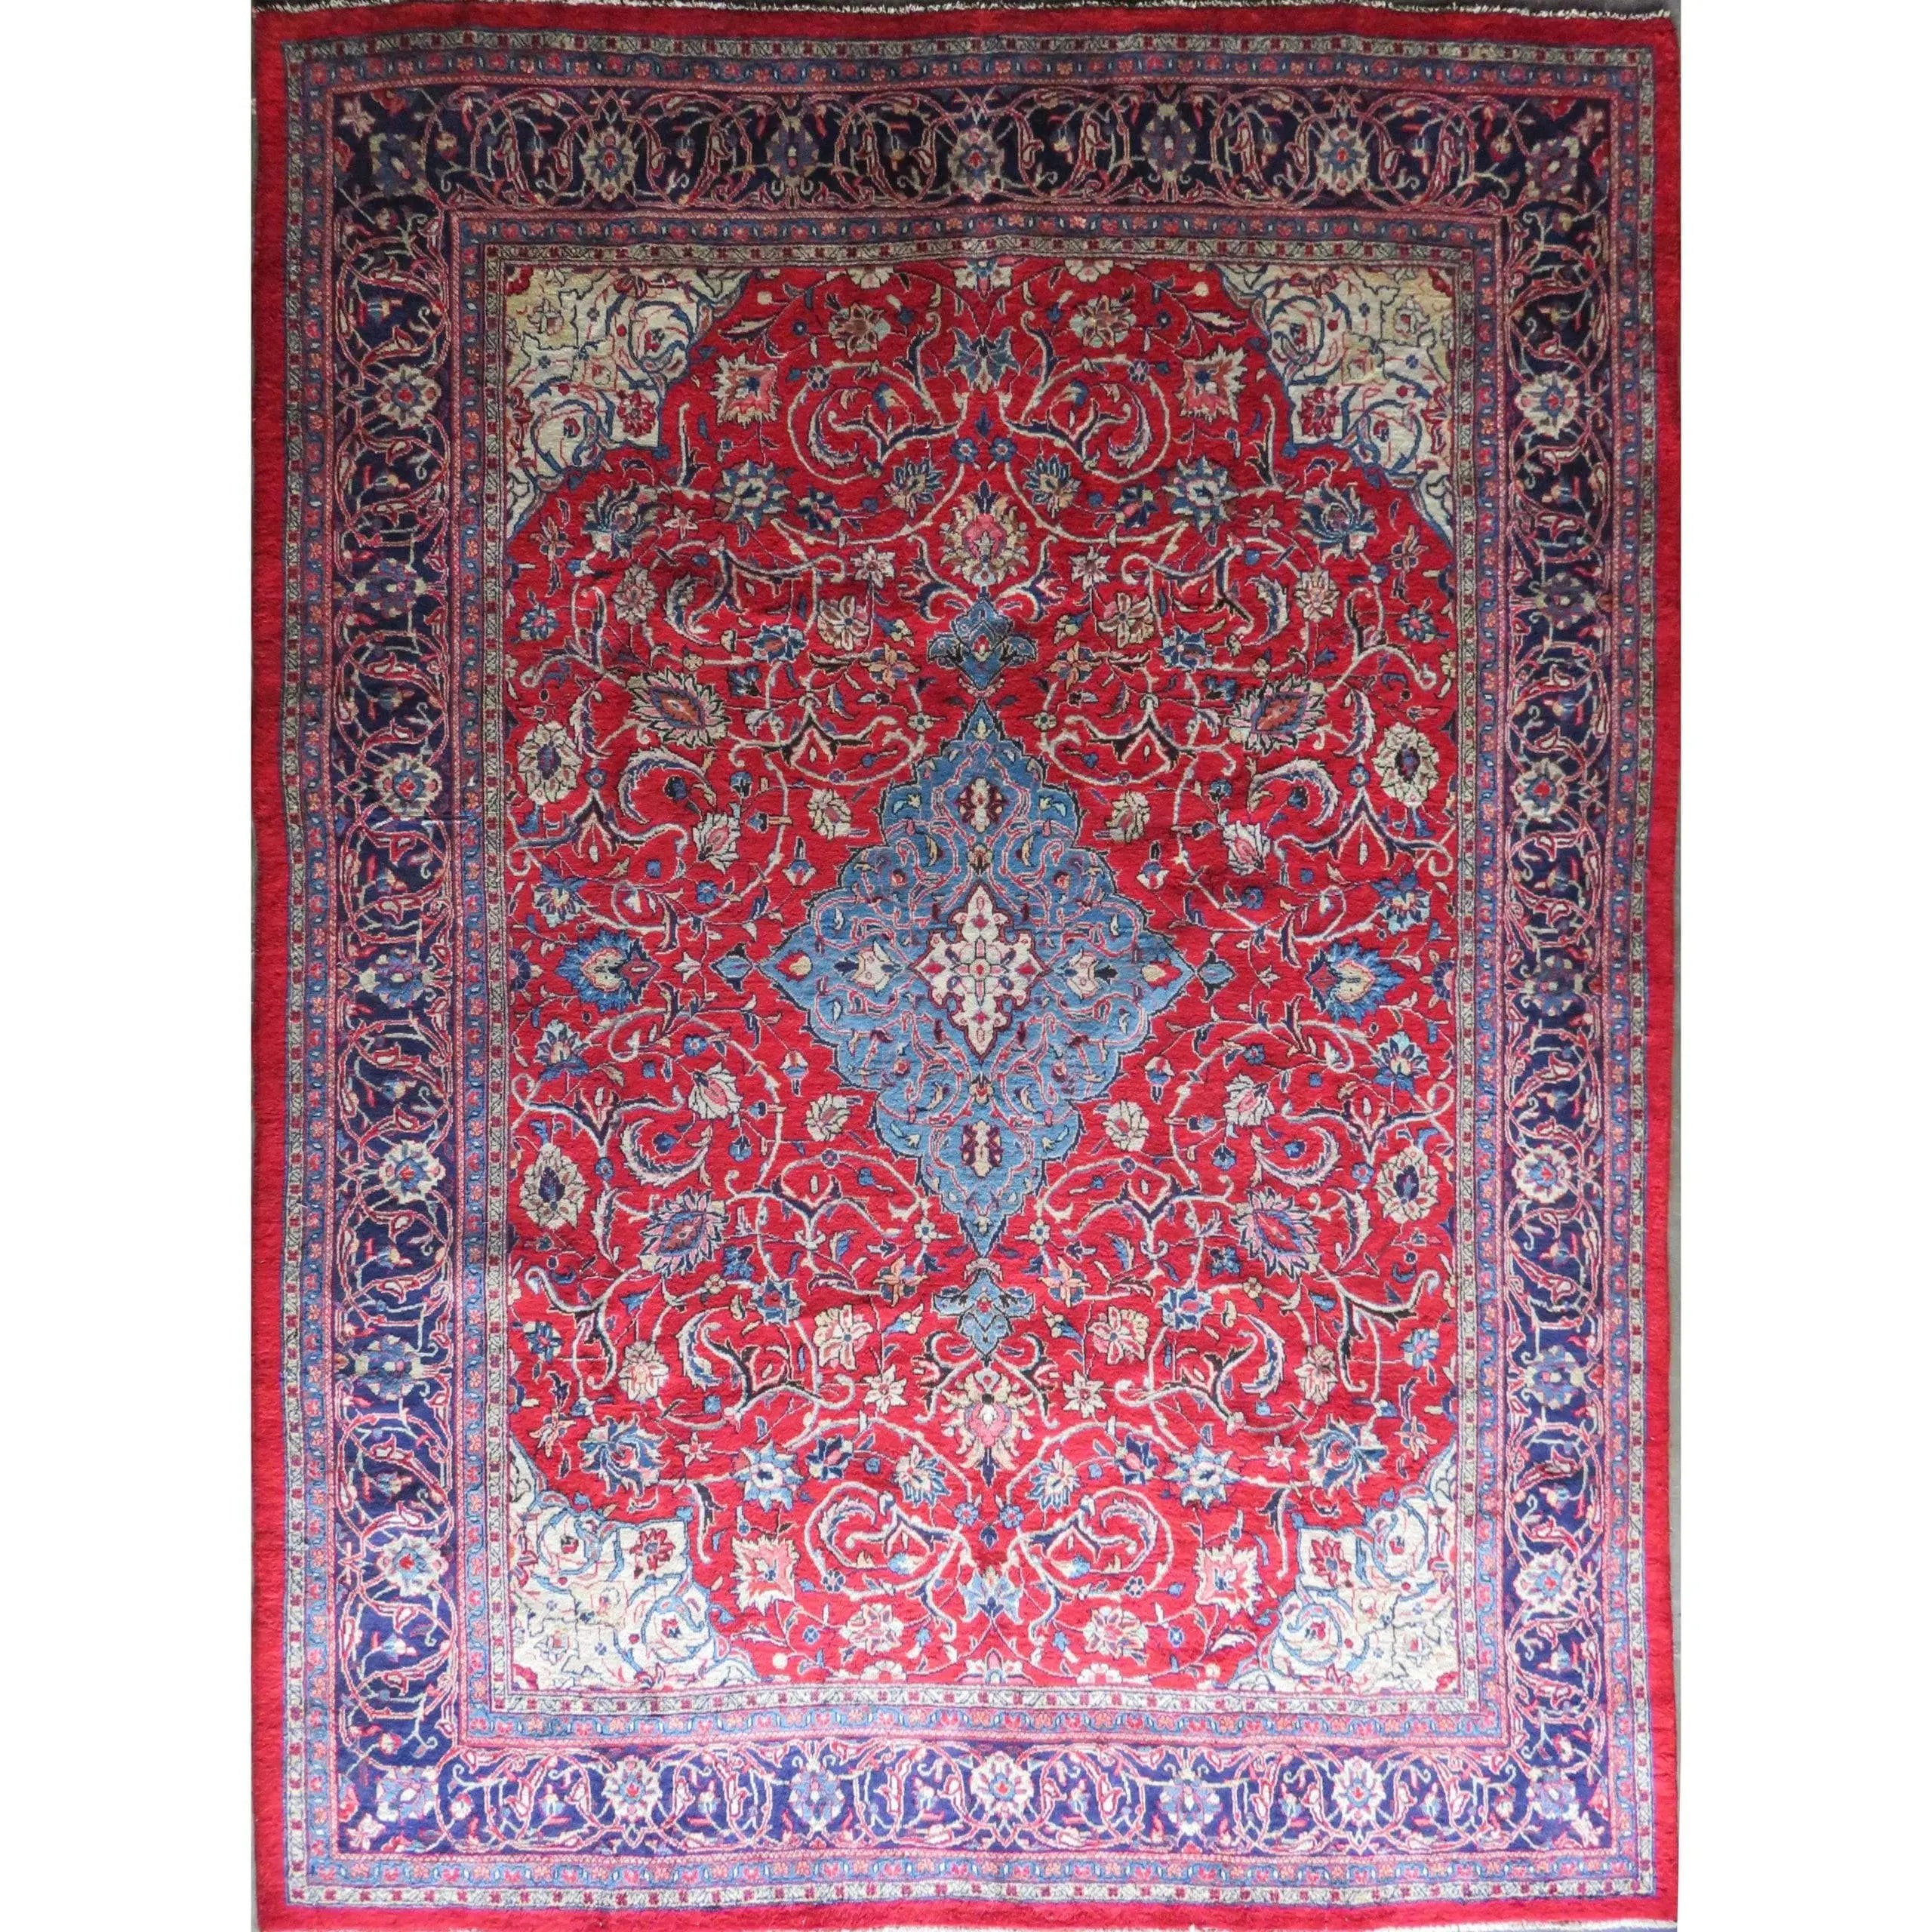 Hand-Knotted Persian Wool Rug _ Luxurious Vintage Design, 13'2" x 9'4", Artisan Crafted